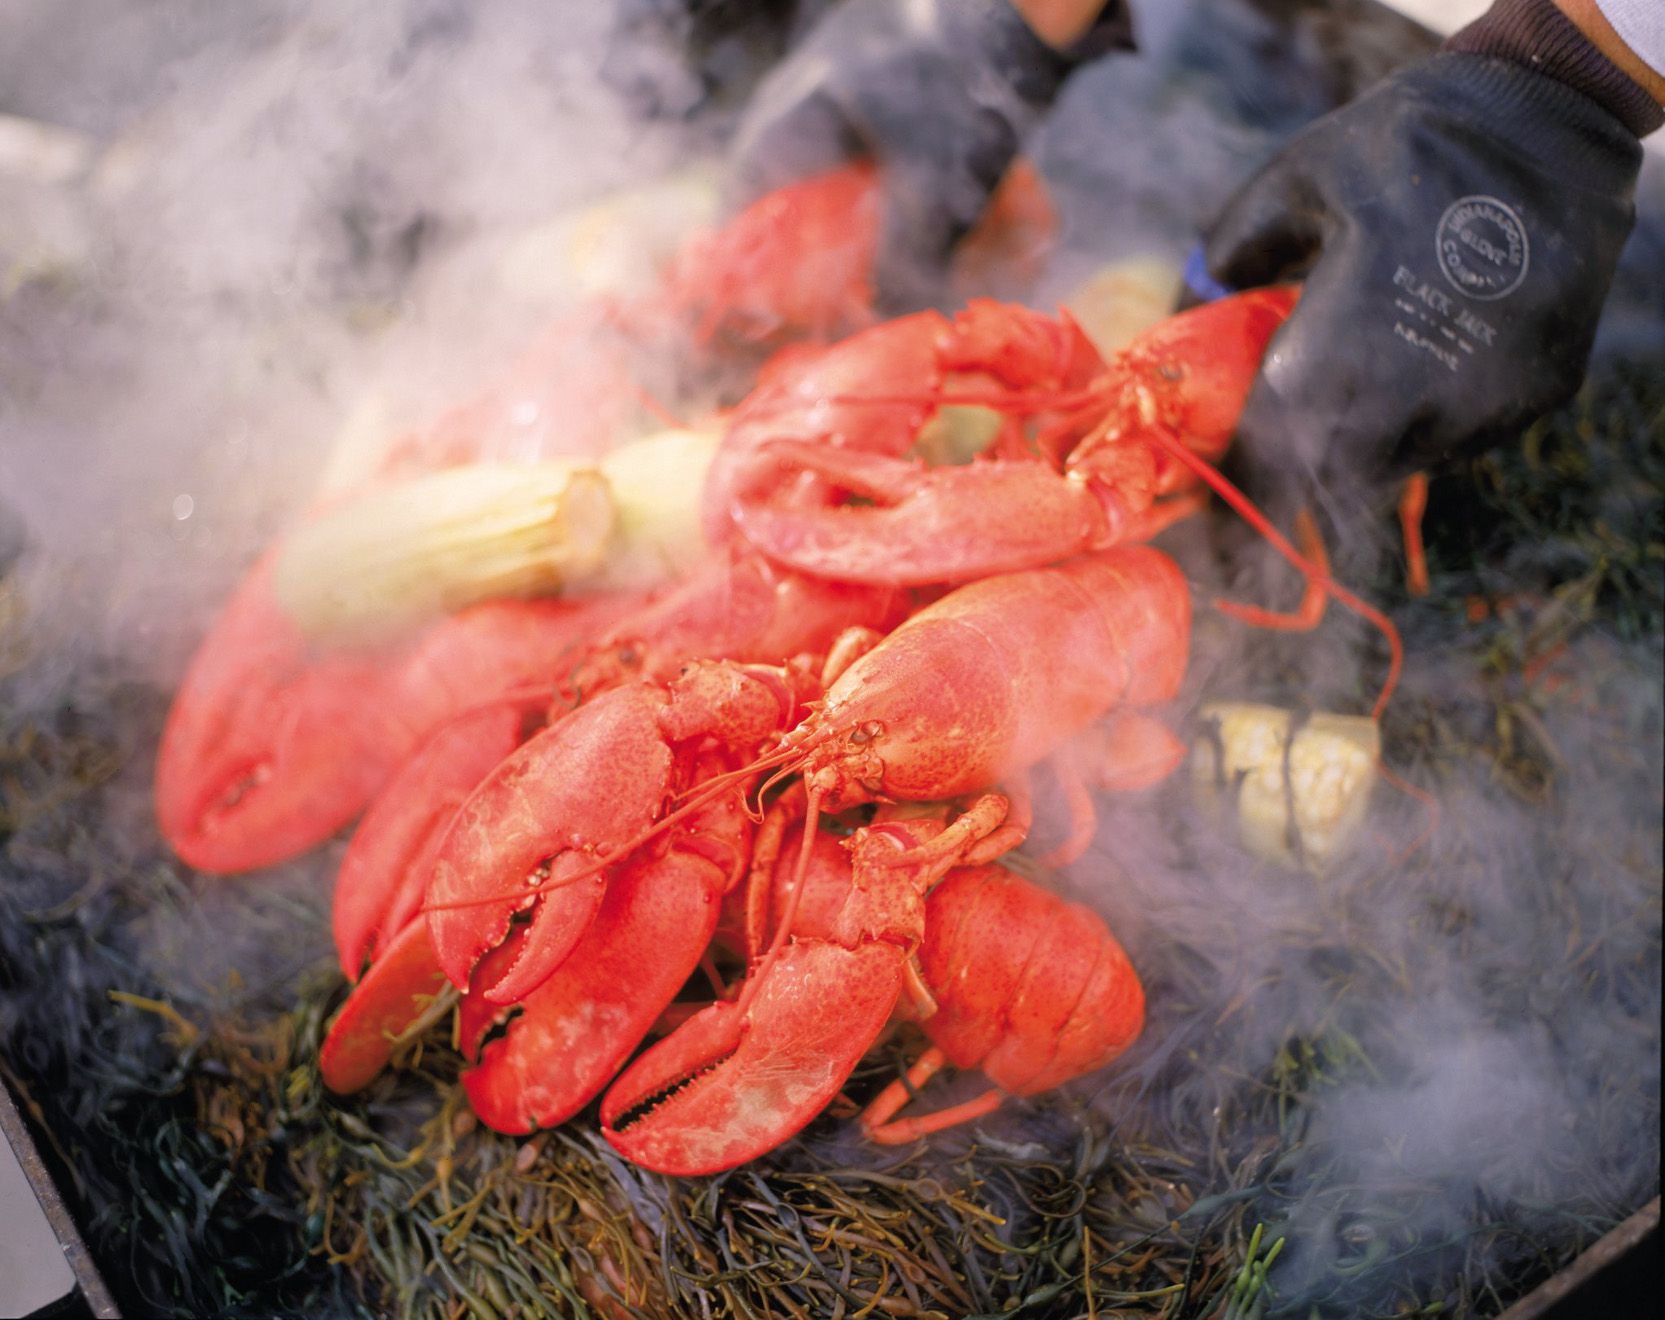 How To Do A Lobster Bake The Traditional Maine Way